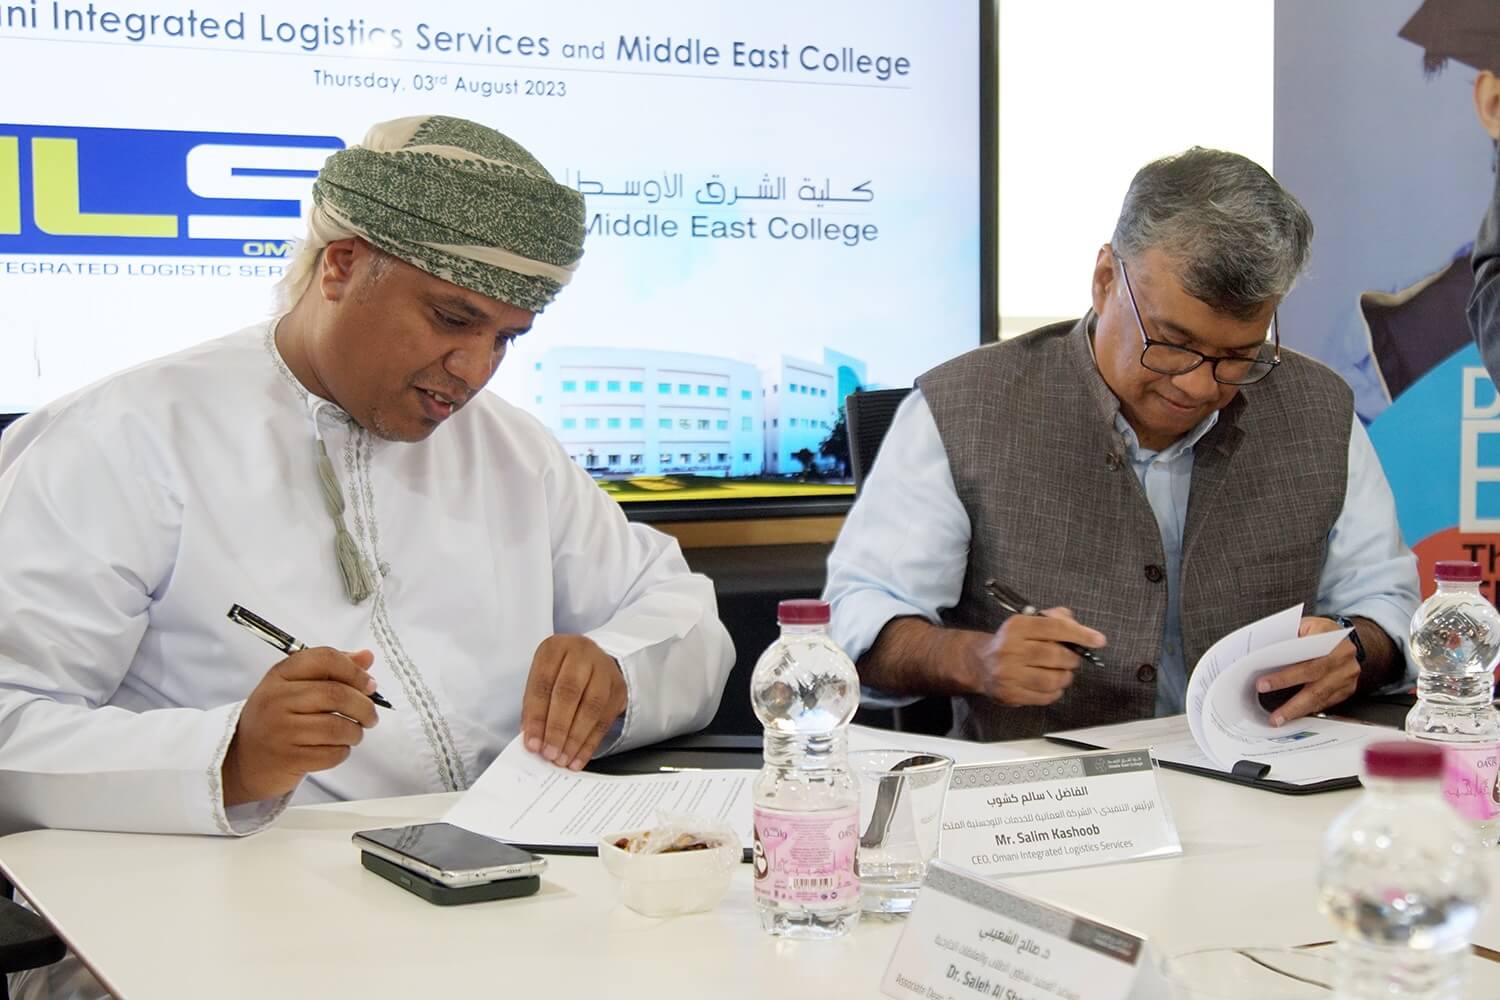 The recent signing of a Memorandum of Understanding (MoU) between Omani Integrated Logistics Services (ILS) and Middle East College (MEC) marks a significant milestone in the industry-academic collaboration era. This partnership ushers in a new phase of growth, innovation, and mutual benefit in the country's logistics and supply chain management sector.